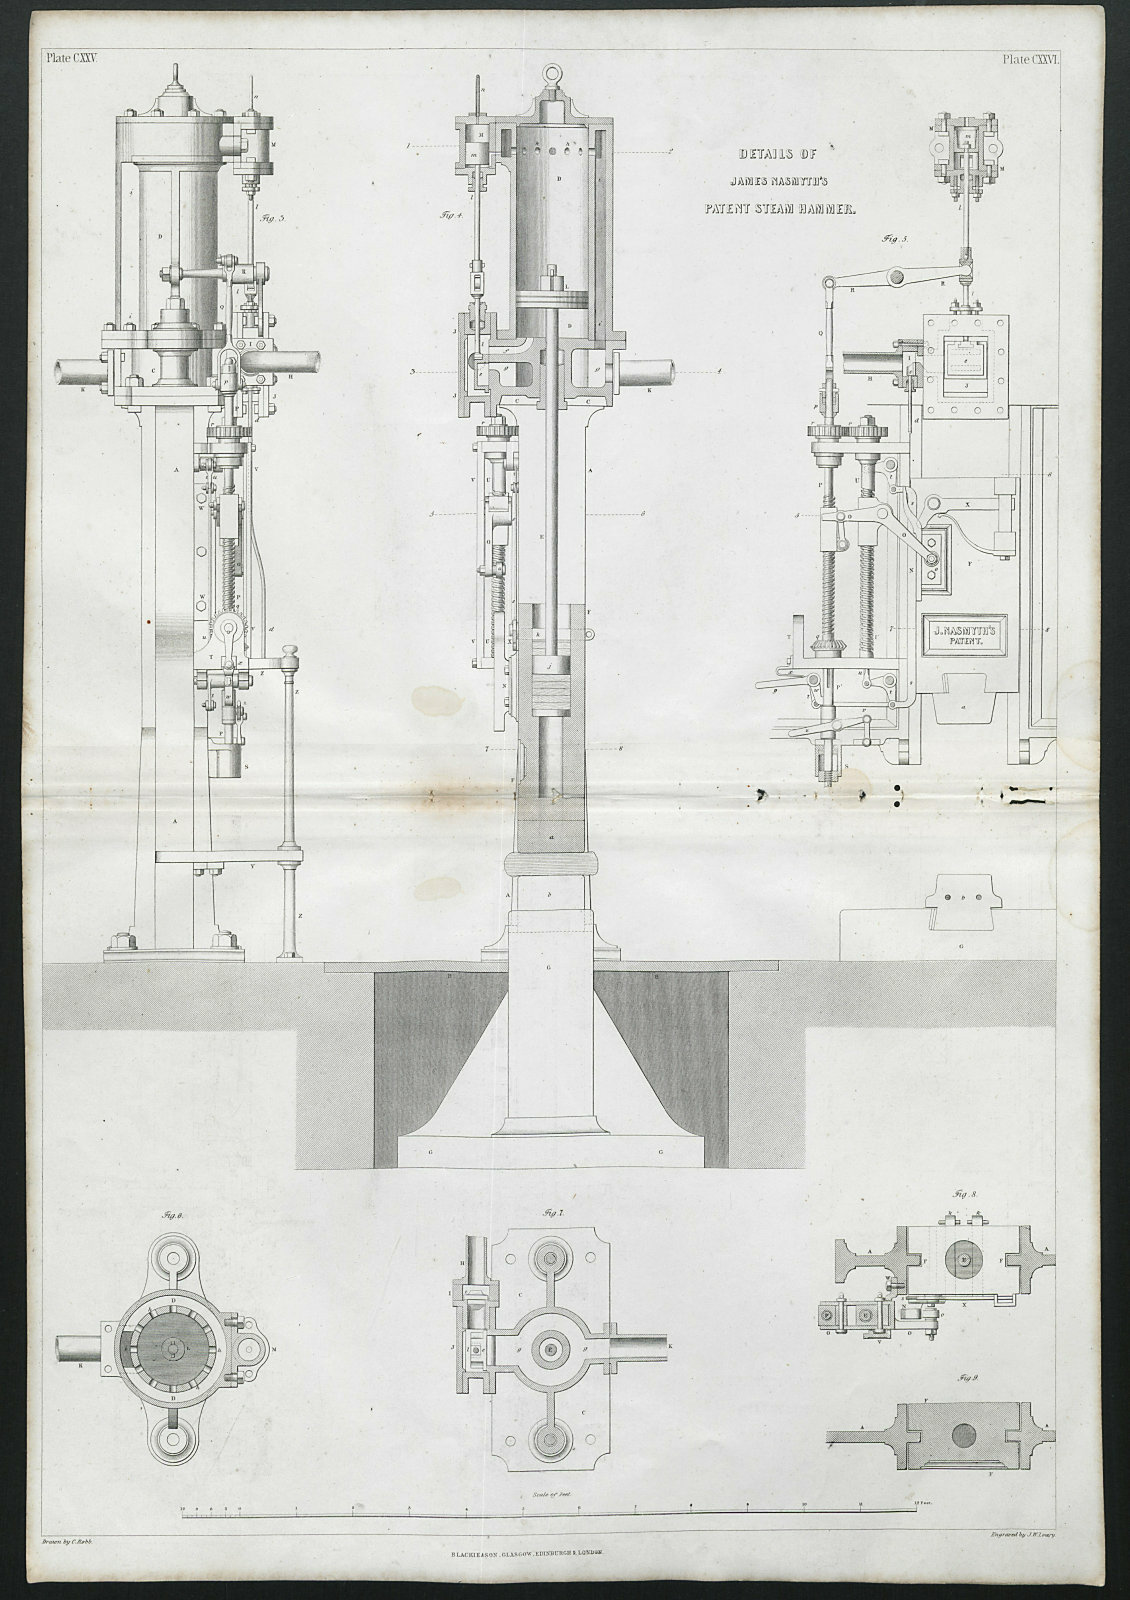 Associate Product VICTORIAN ENGINEERING DRAWING James Nasmyth's patent steam hammer details 1847